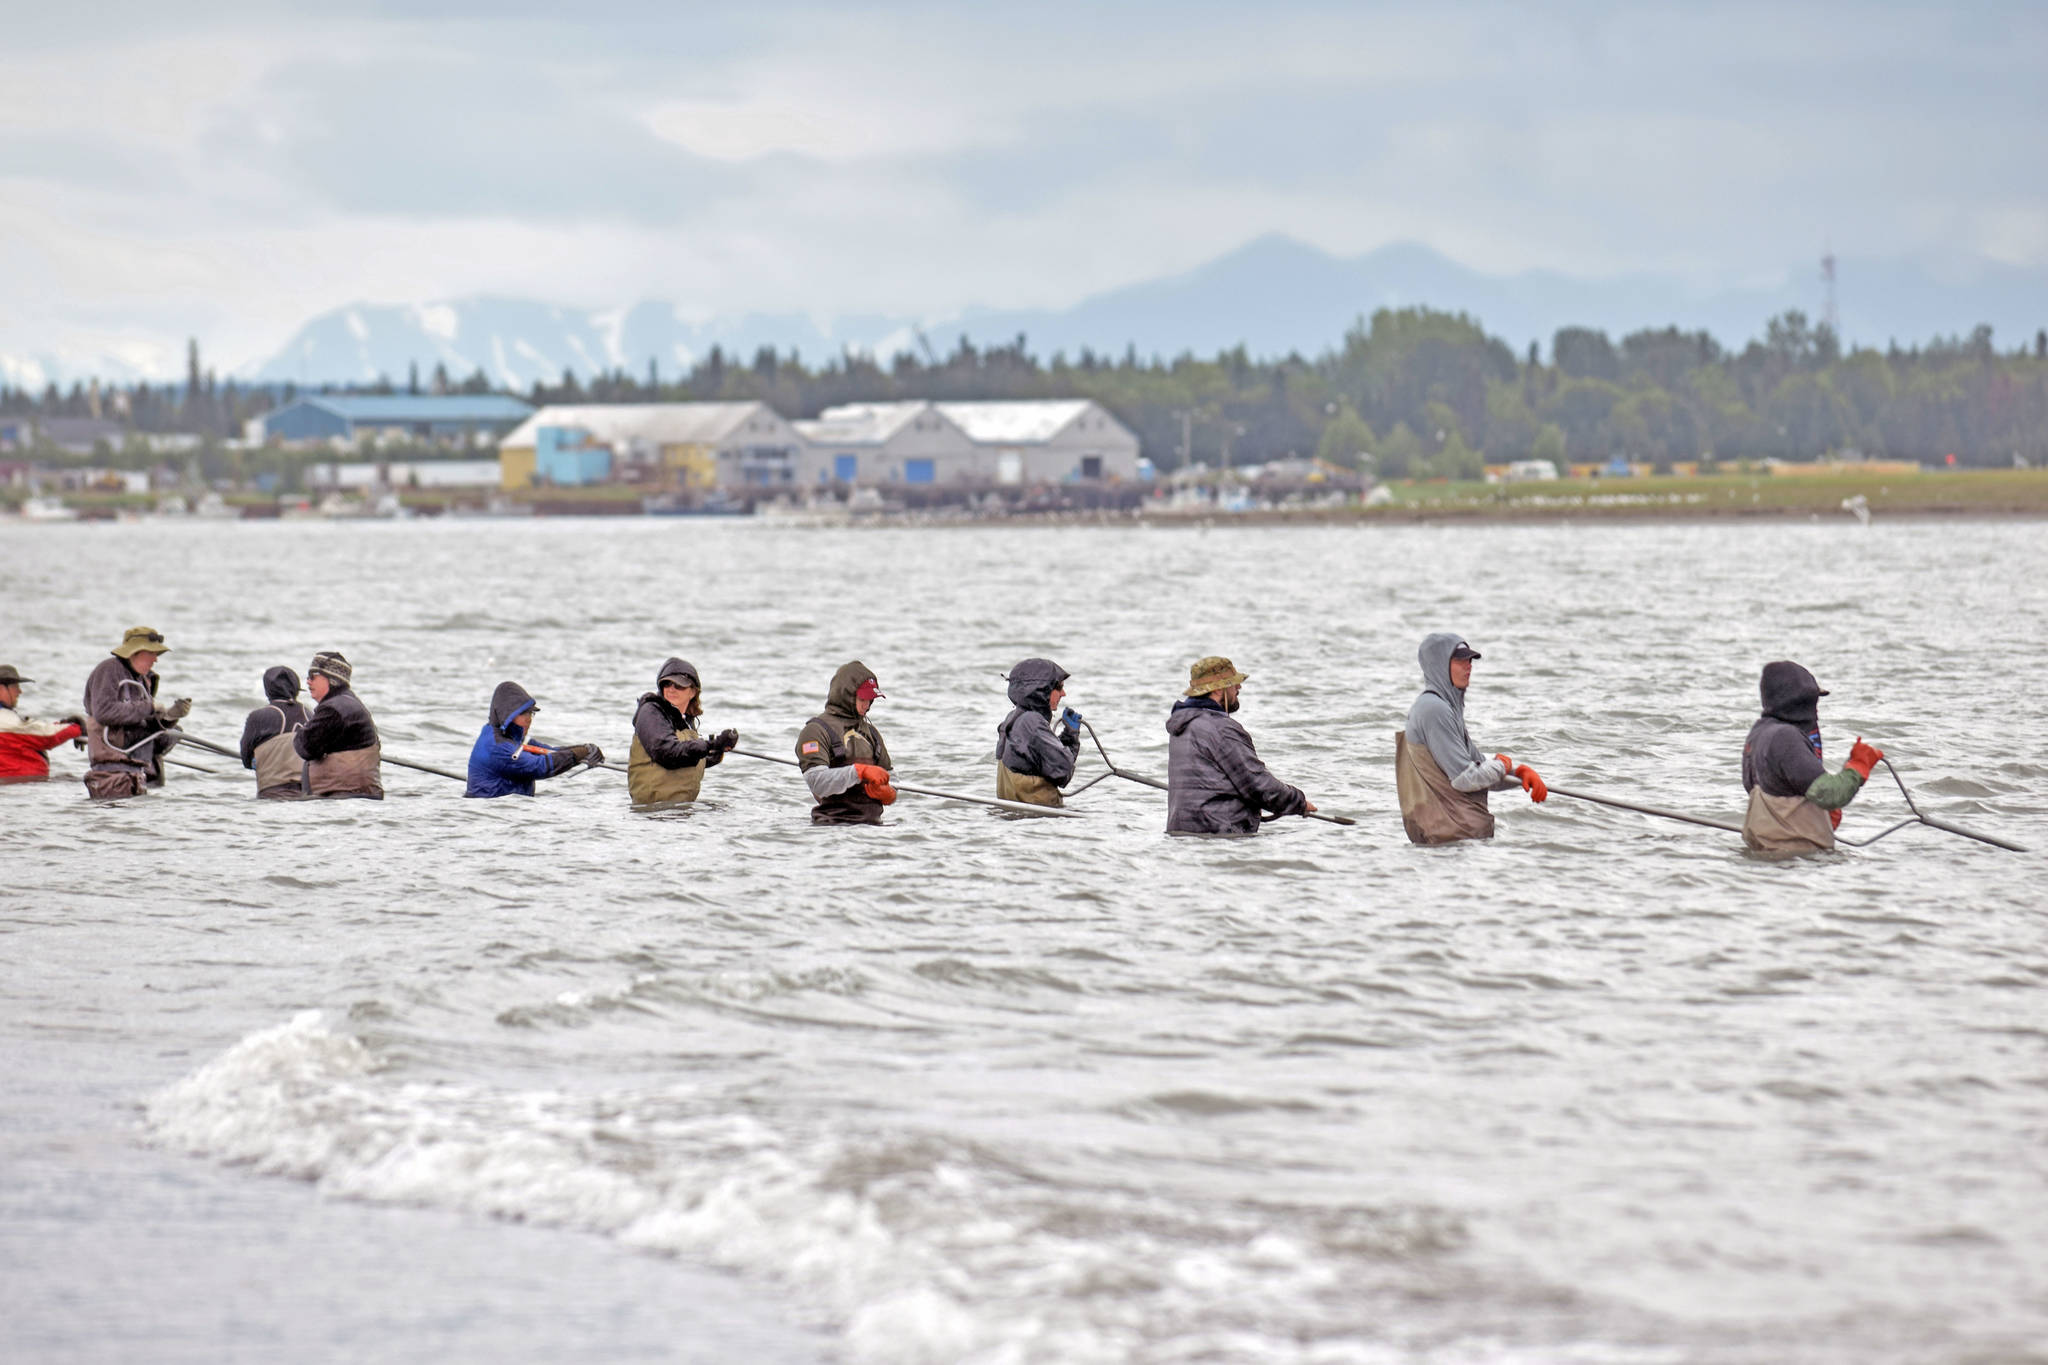 Dipnetters cast their nets along the shore of Kenai Beach on the opening day of the three-week dipnet season on Tuesday, July 10, in Kenai, Alaska. (Photo by Erin Thompson/Peninsula Clarion)